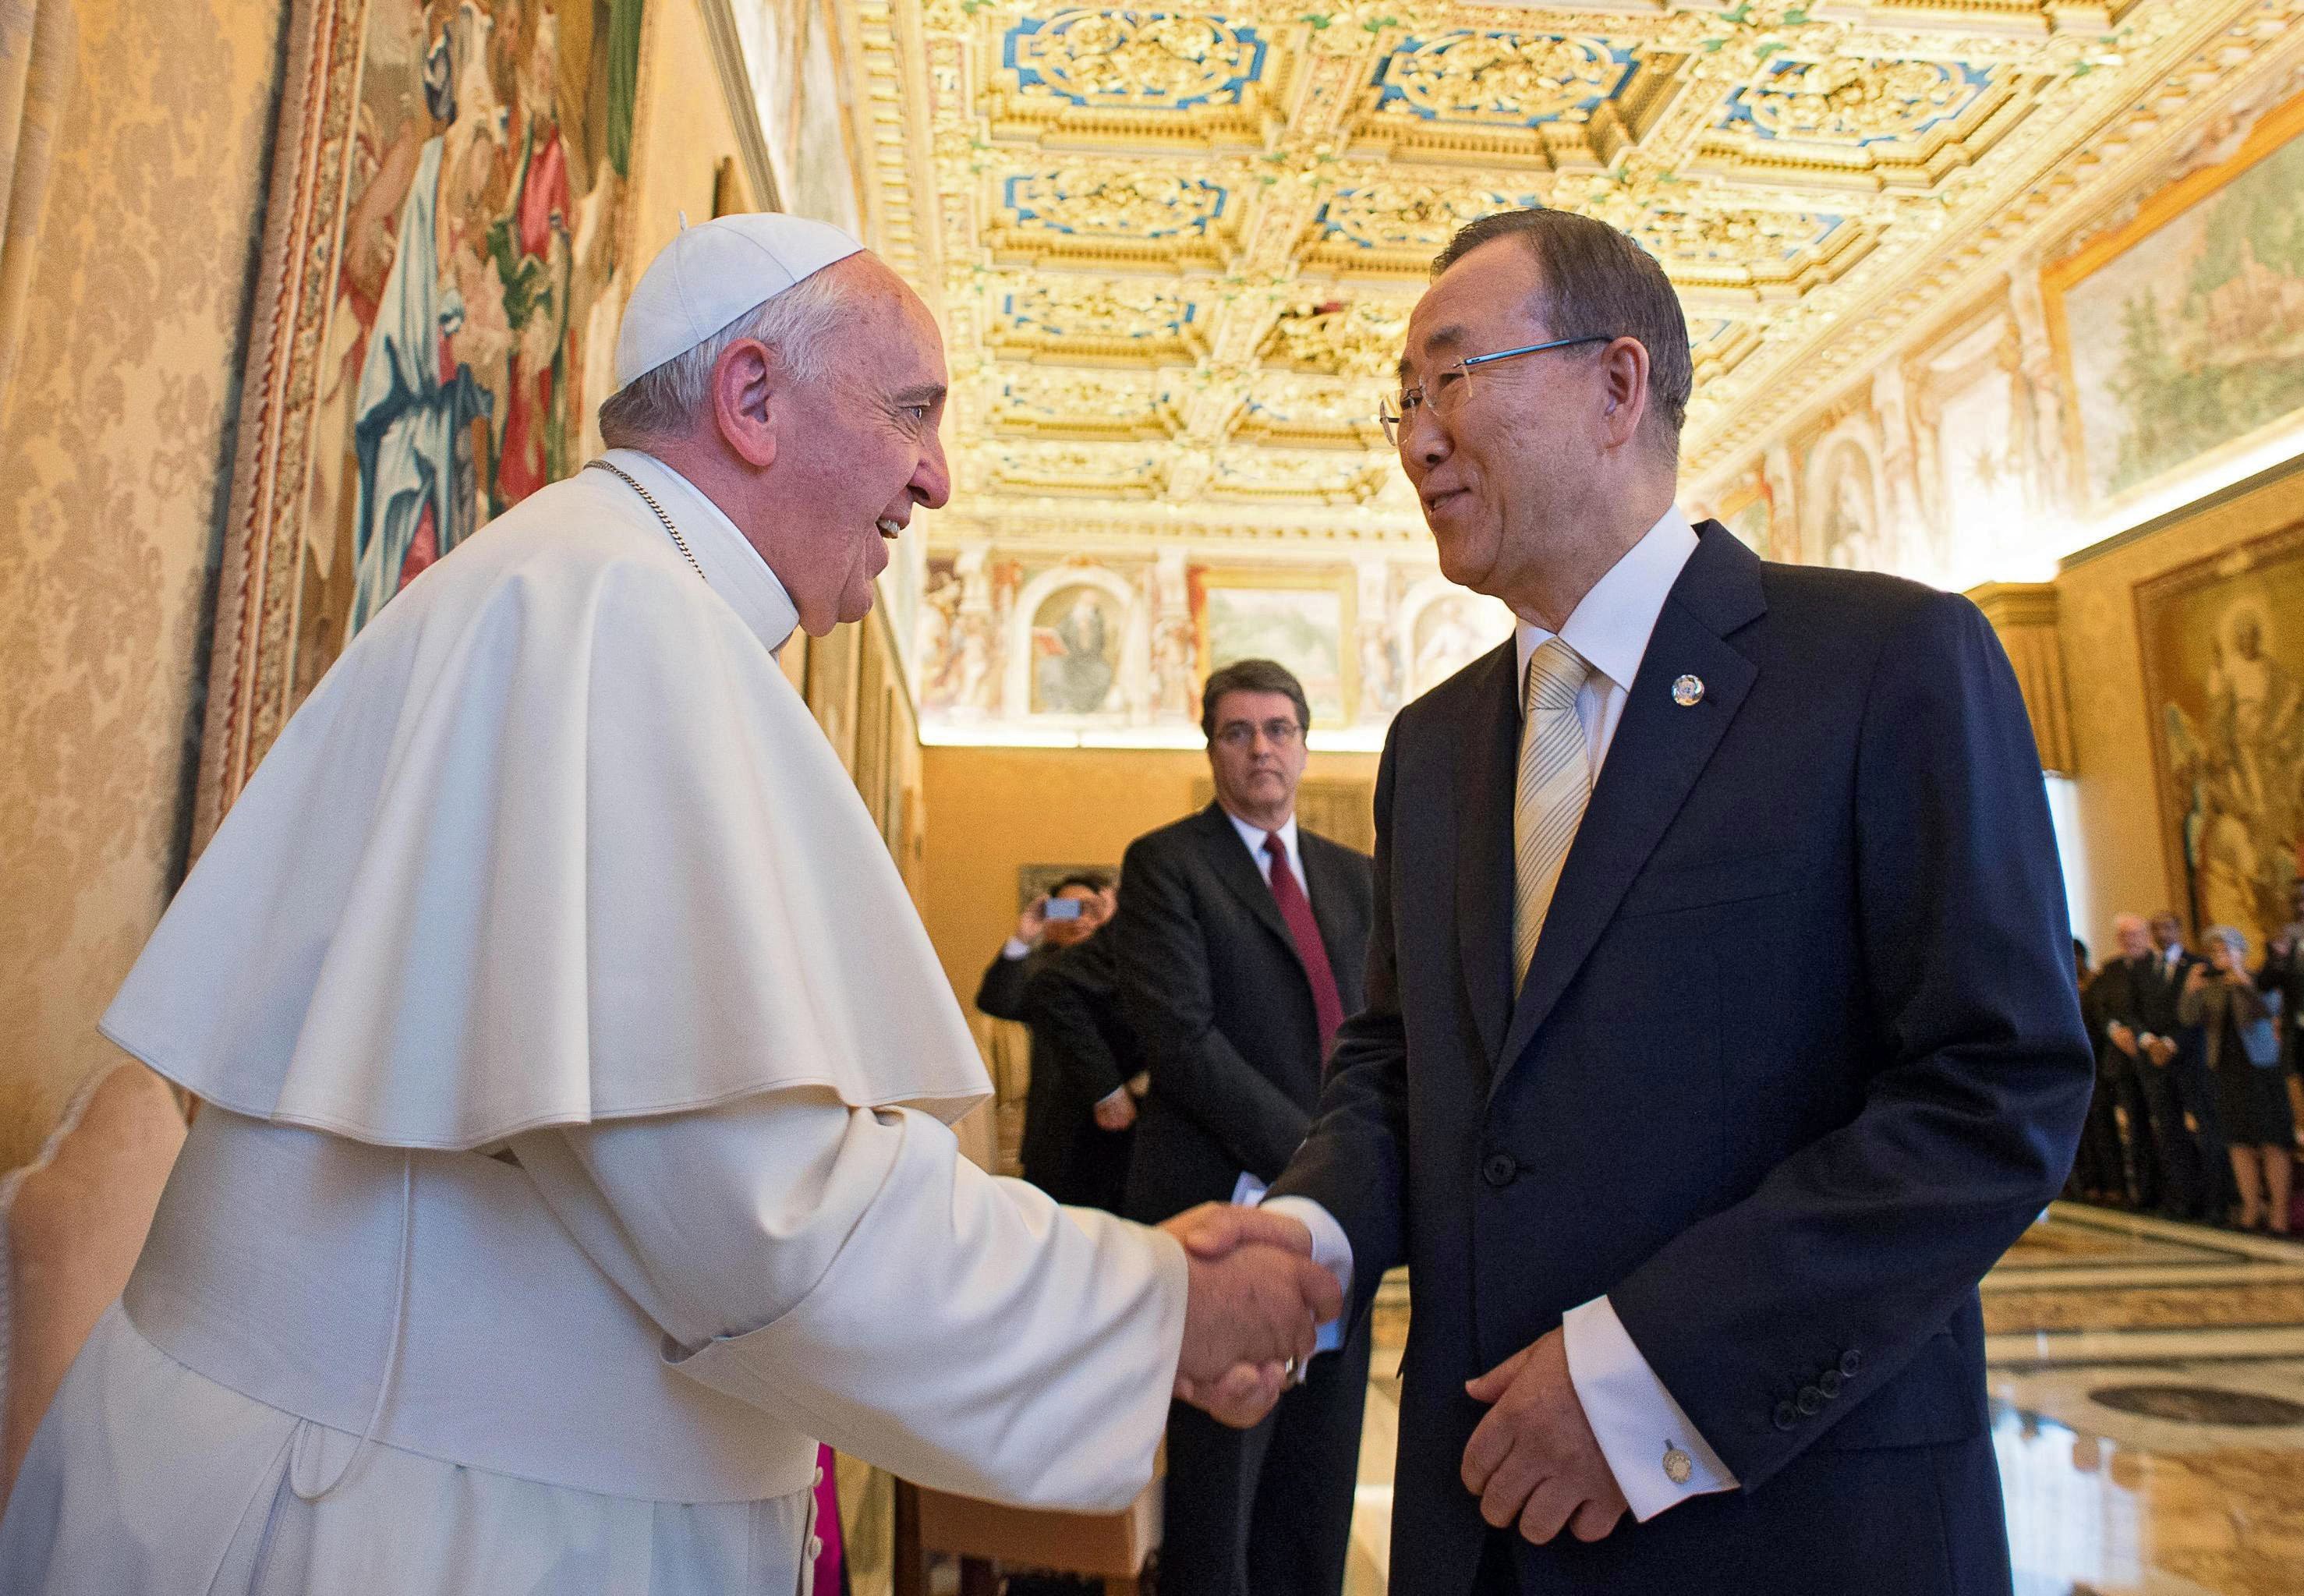 Pope Francis meets UN Secretary General Ban Ki-moon and members of UN System Chief Executives Board for the biannual meeting on strategic coordination in the Consistory Hall of the Apostolic Palace in Vatican City on May 9, 2014. (Osservatore Romano/EPA)